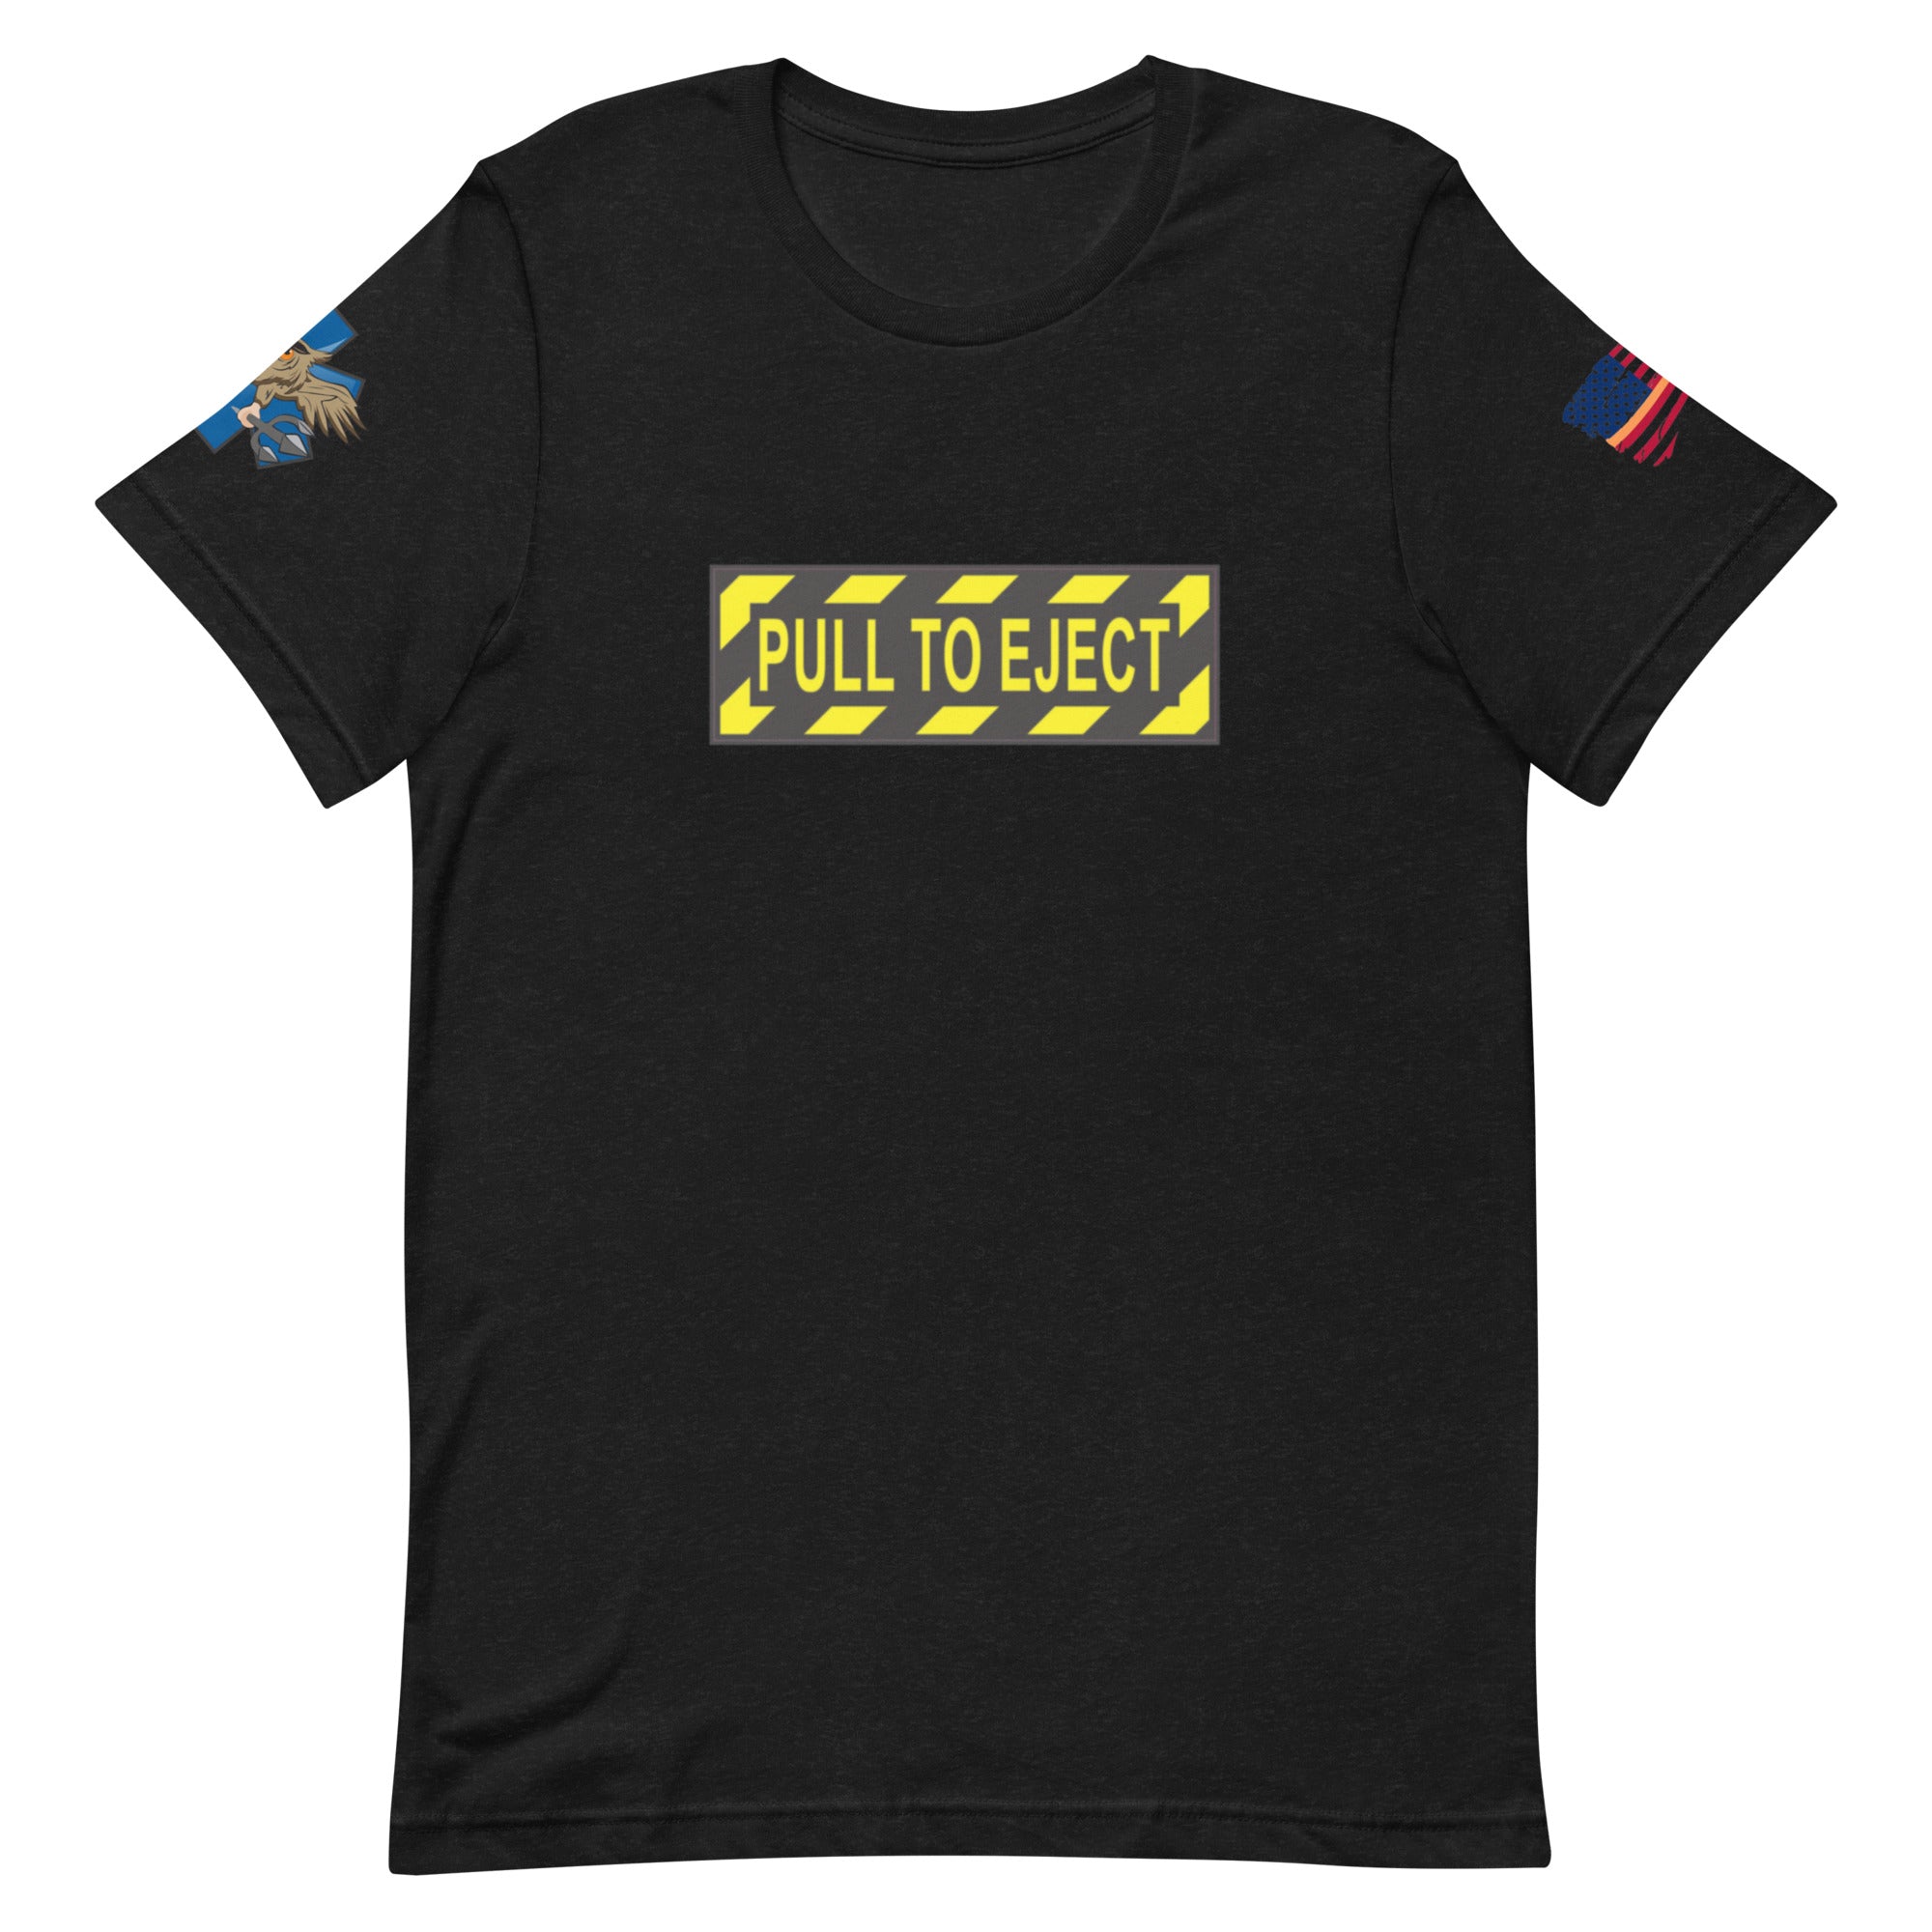 'Pull To Eject' t-shirt